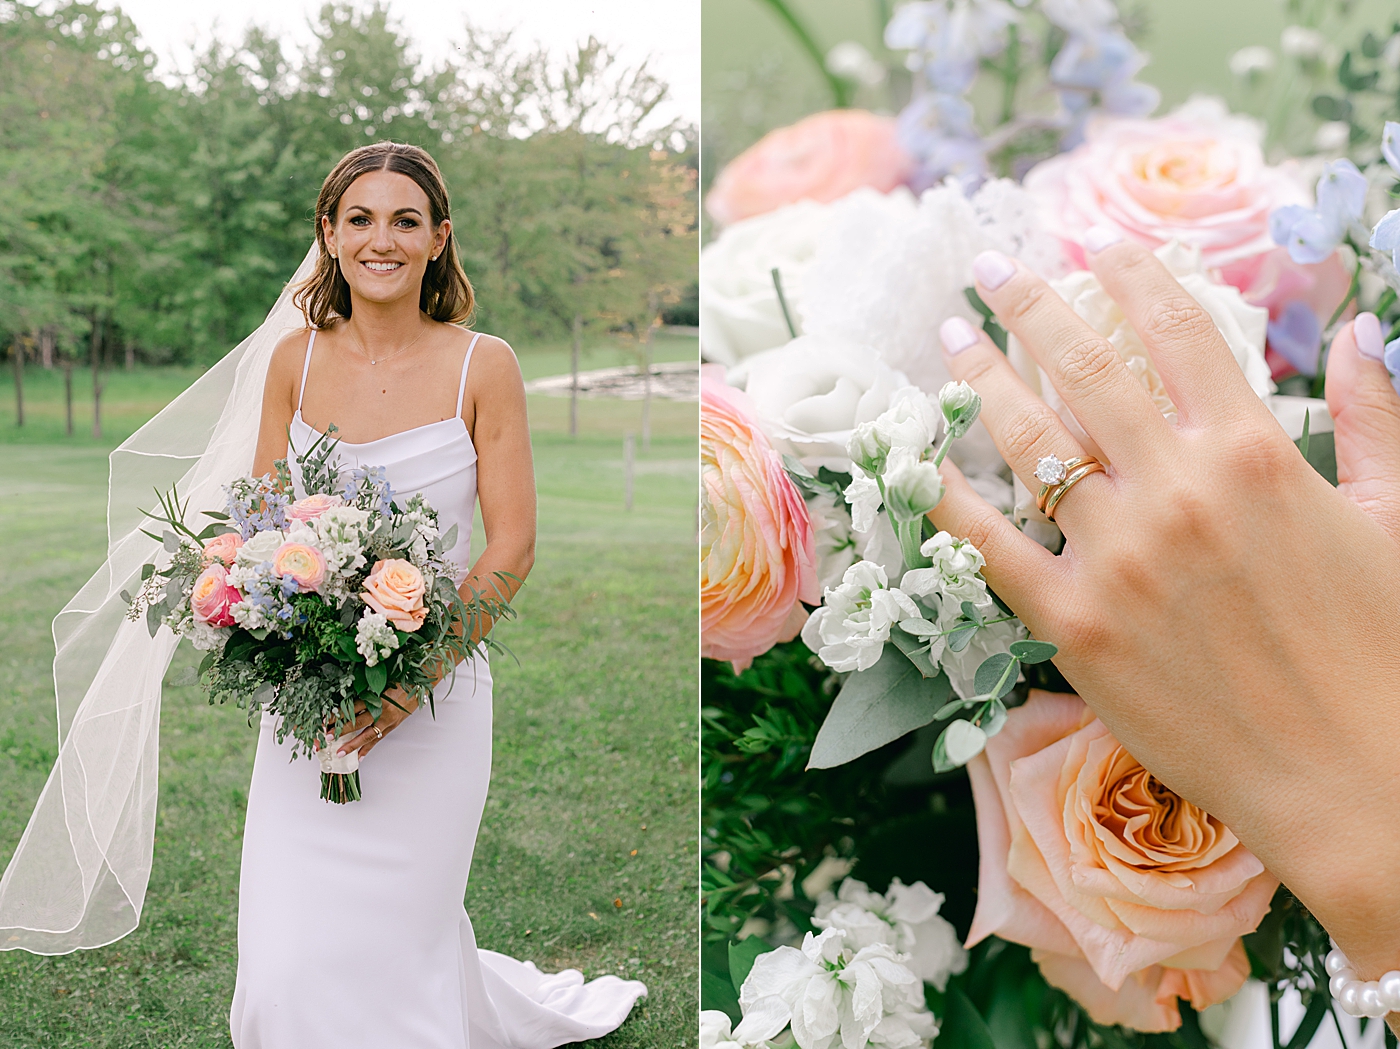 Bride holding her bouquet | Image by Hope Helmuth Photography